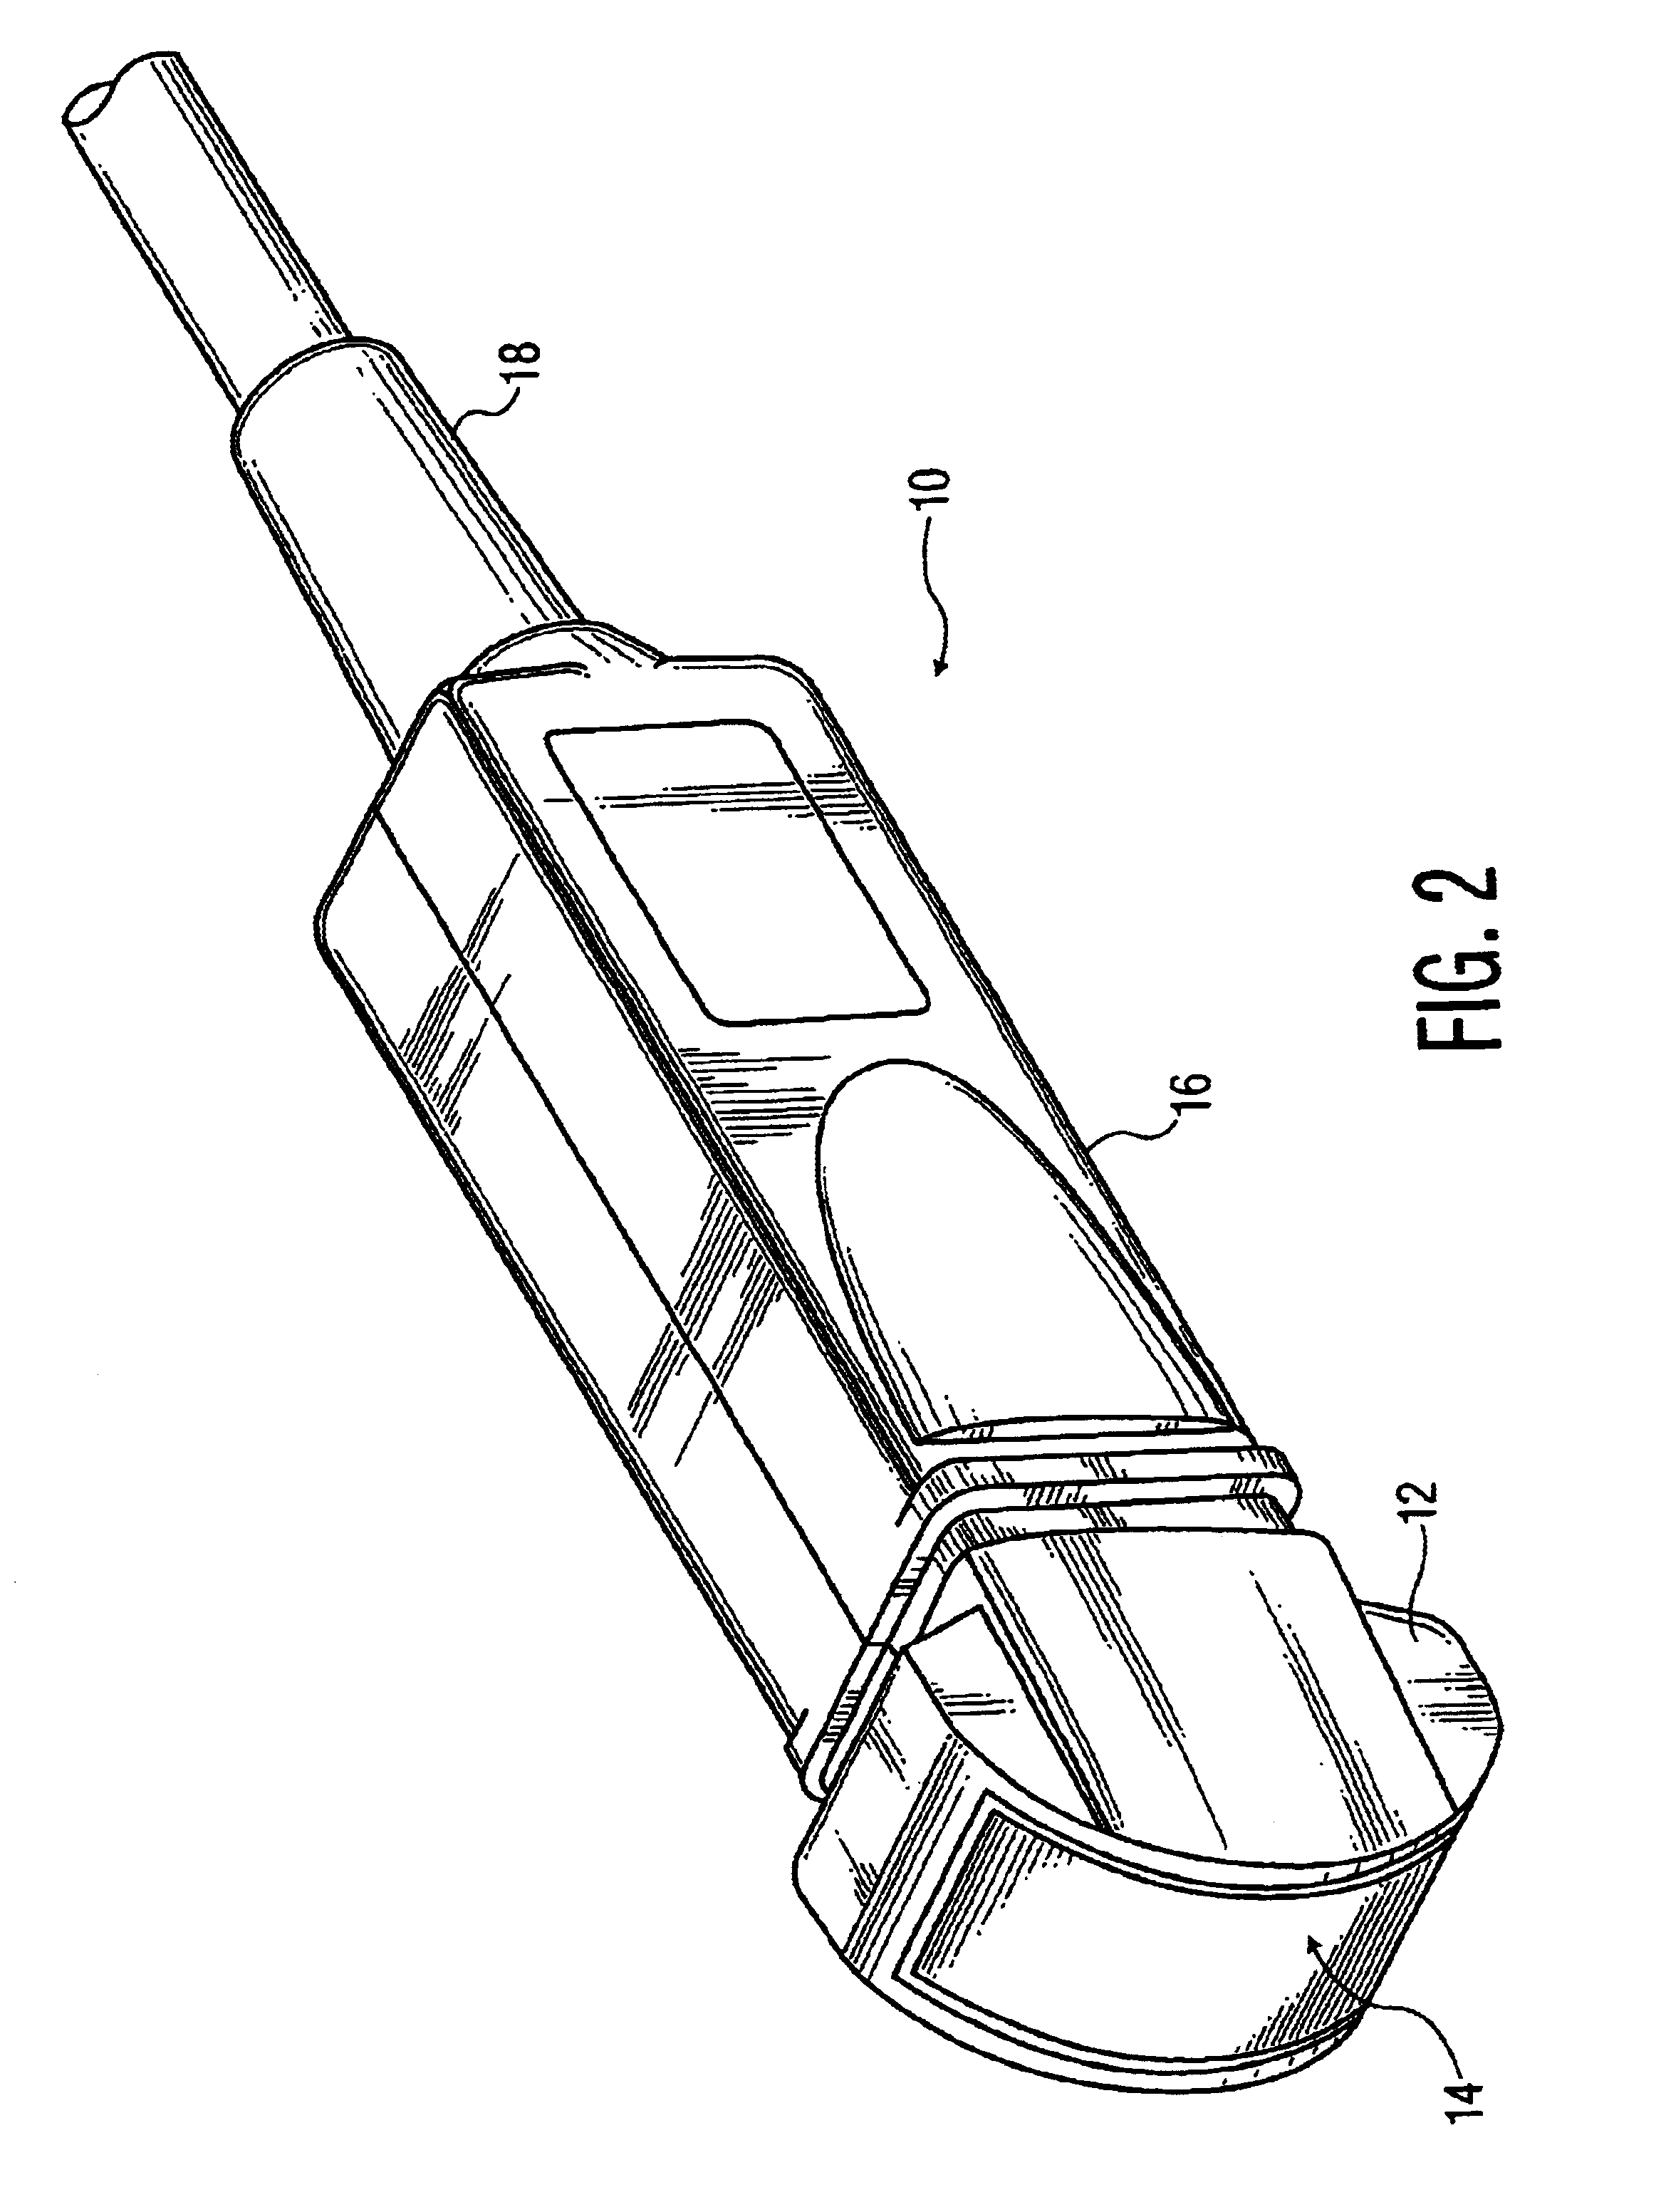 Operator supervised temperature control system and method for an ultrasound transducer